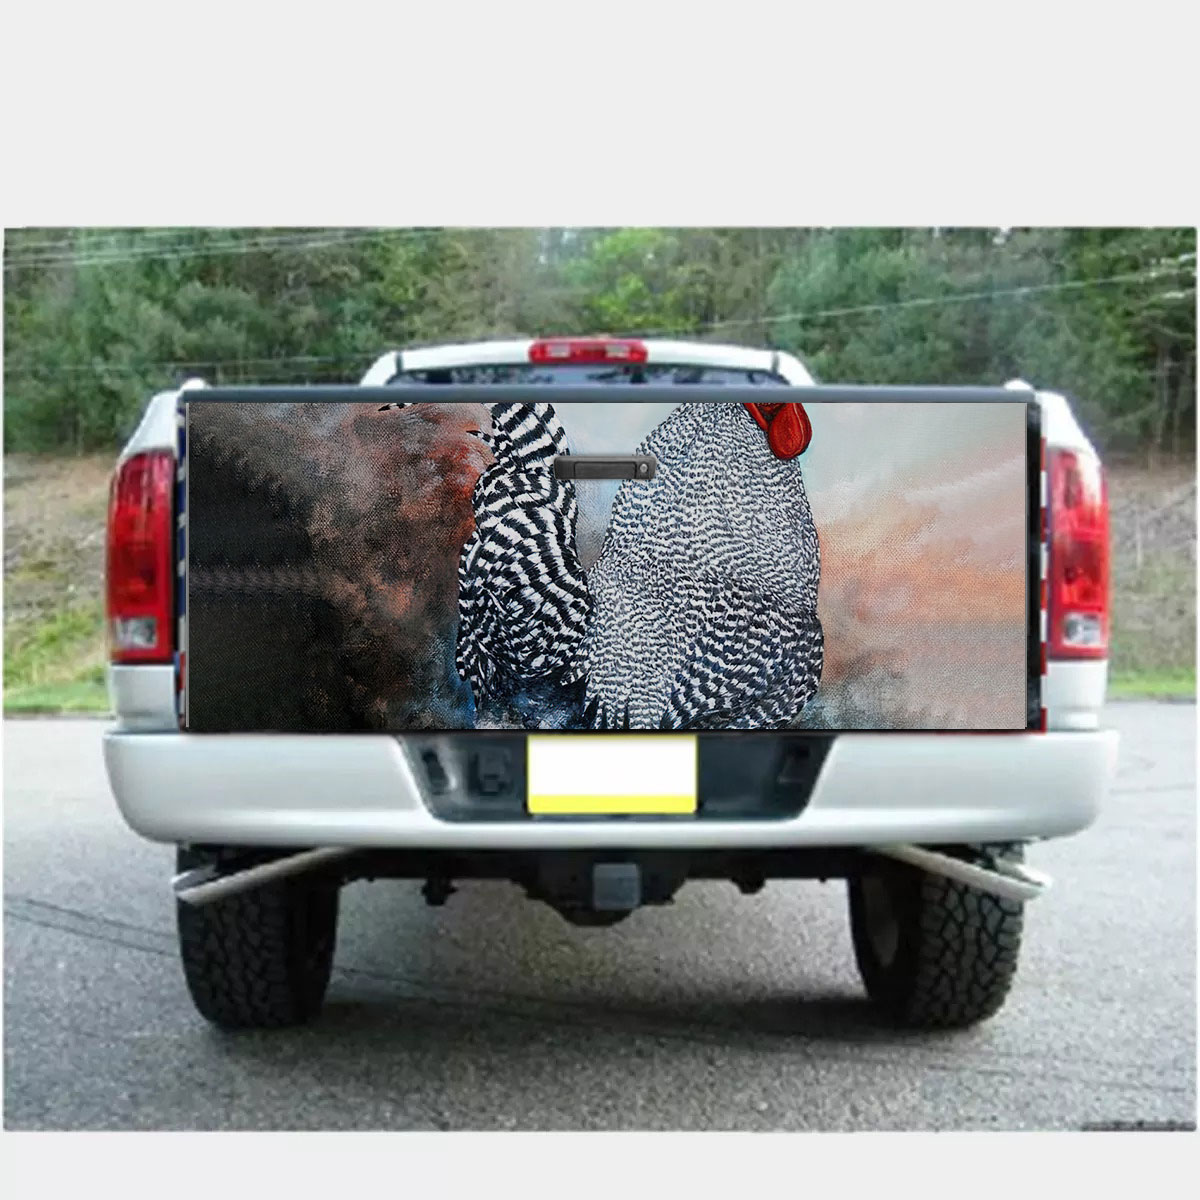 Chicken Pattern 3 Fabulous Truck Bed Decal